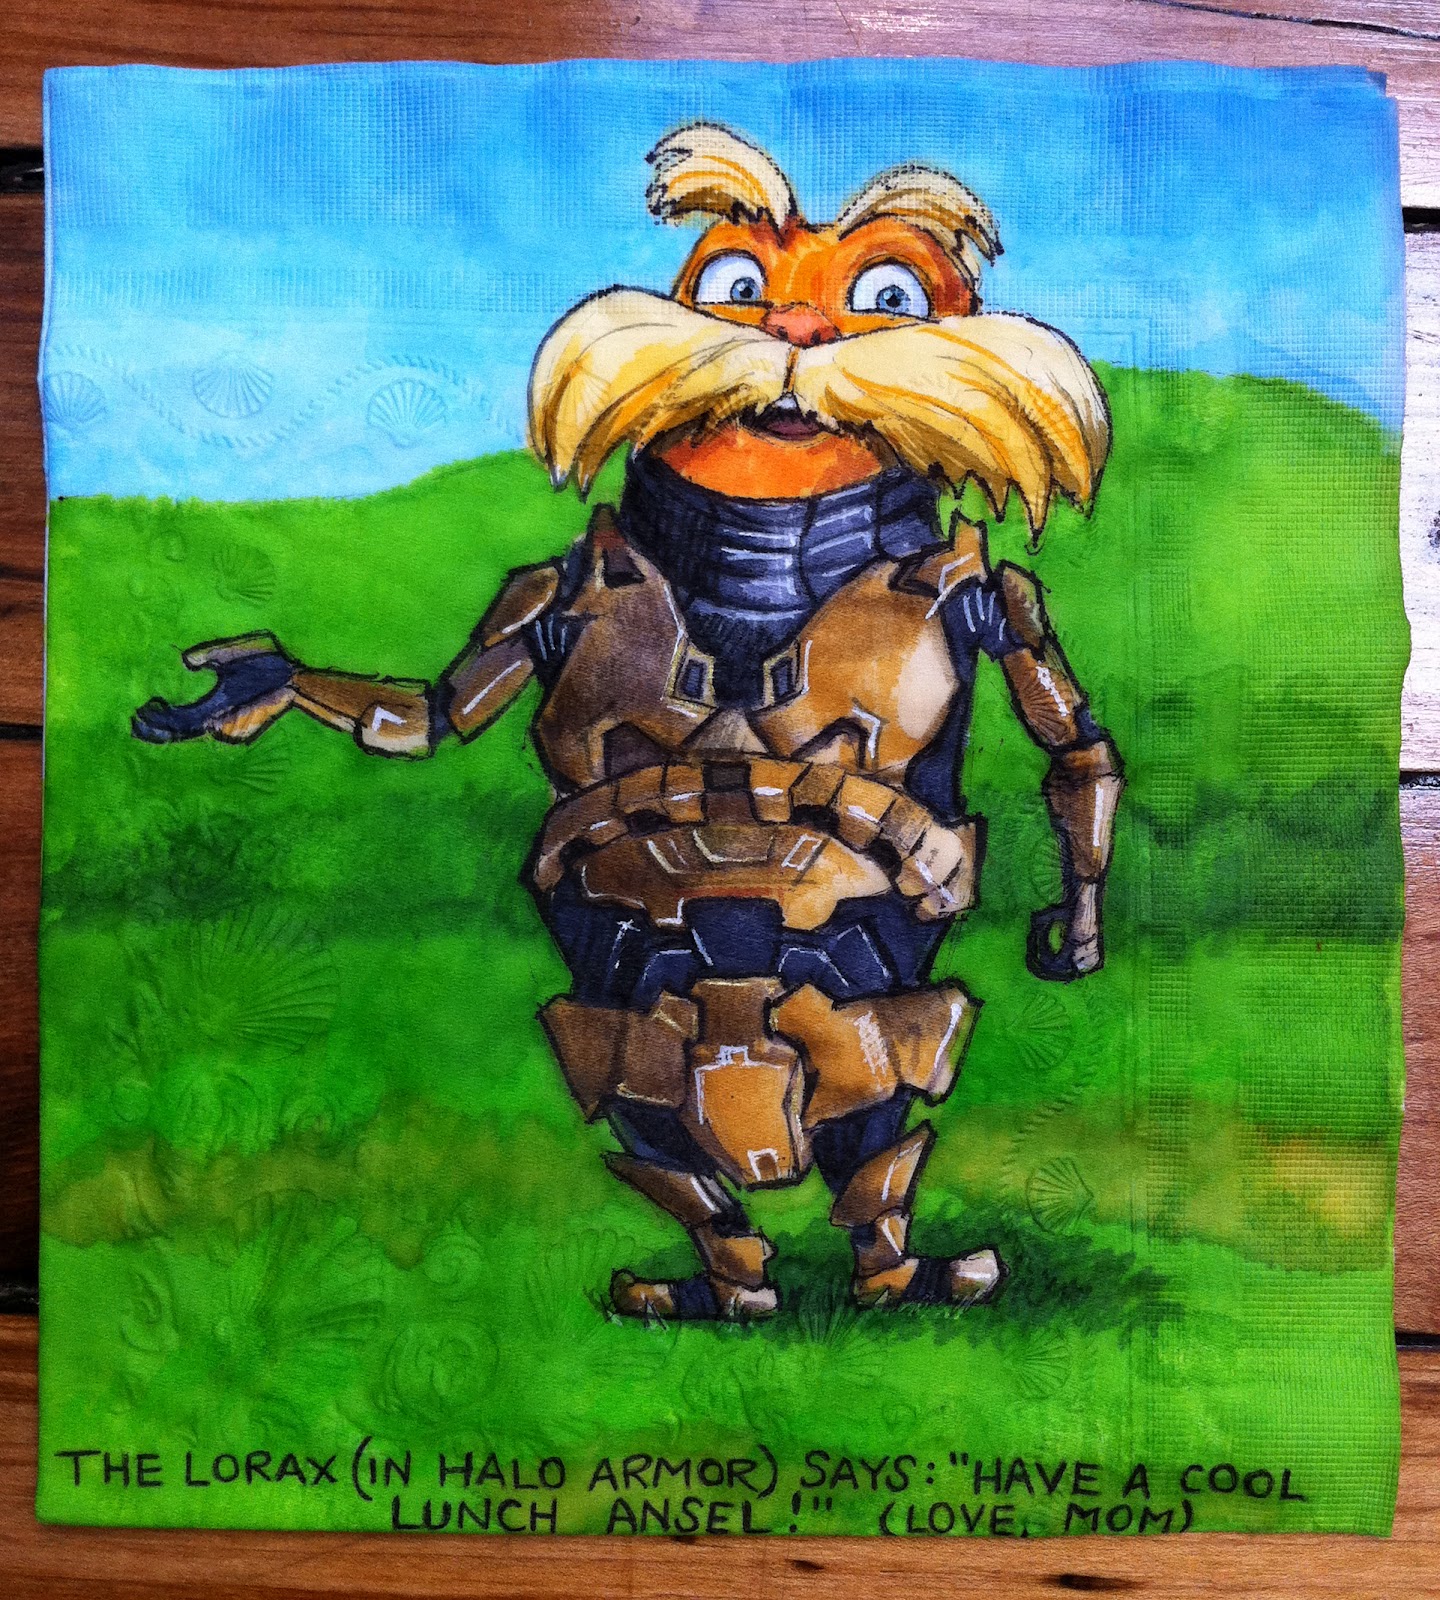 The Lorax - . The Lorax In Halo Armor Says "Have A Cool Lunch Ansel Love Mom